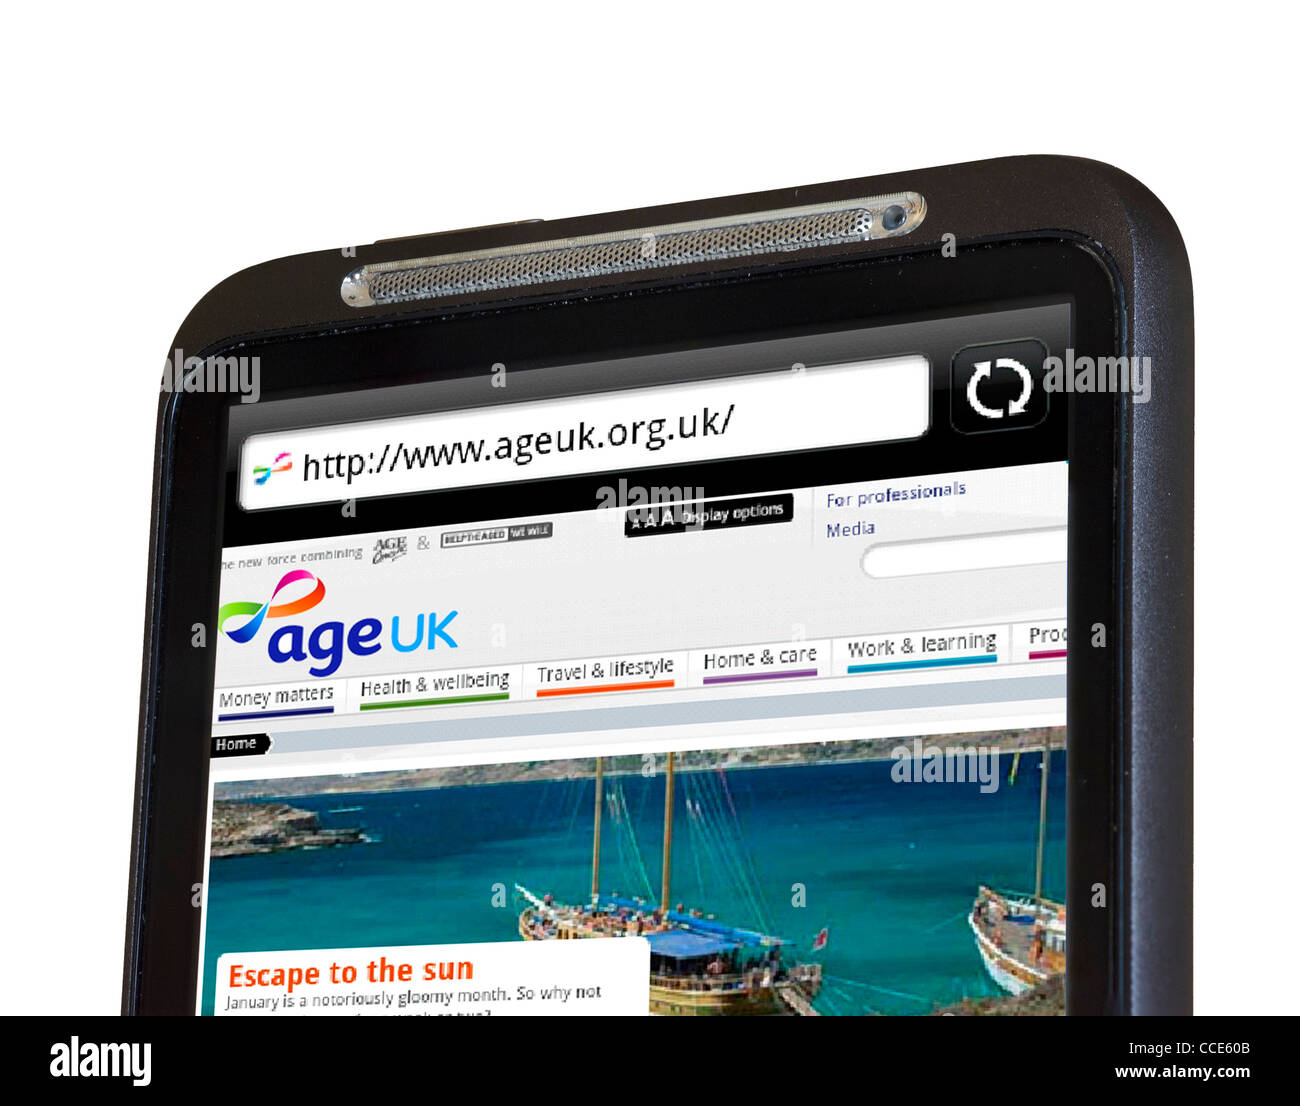 The Age UK charity website (an amalgamation of Age Concern and Help the Aged) viewed on an HTC smartphone Stock Photo